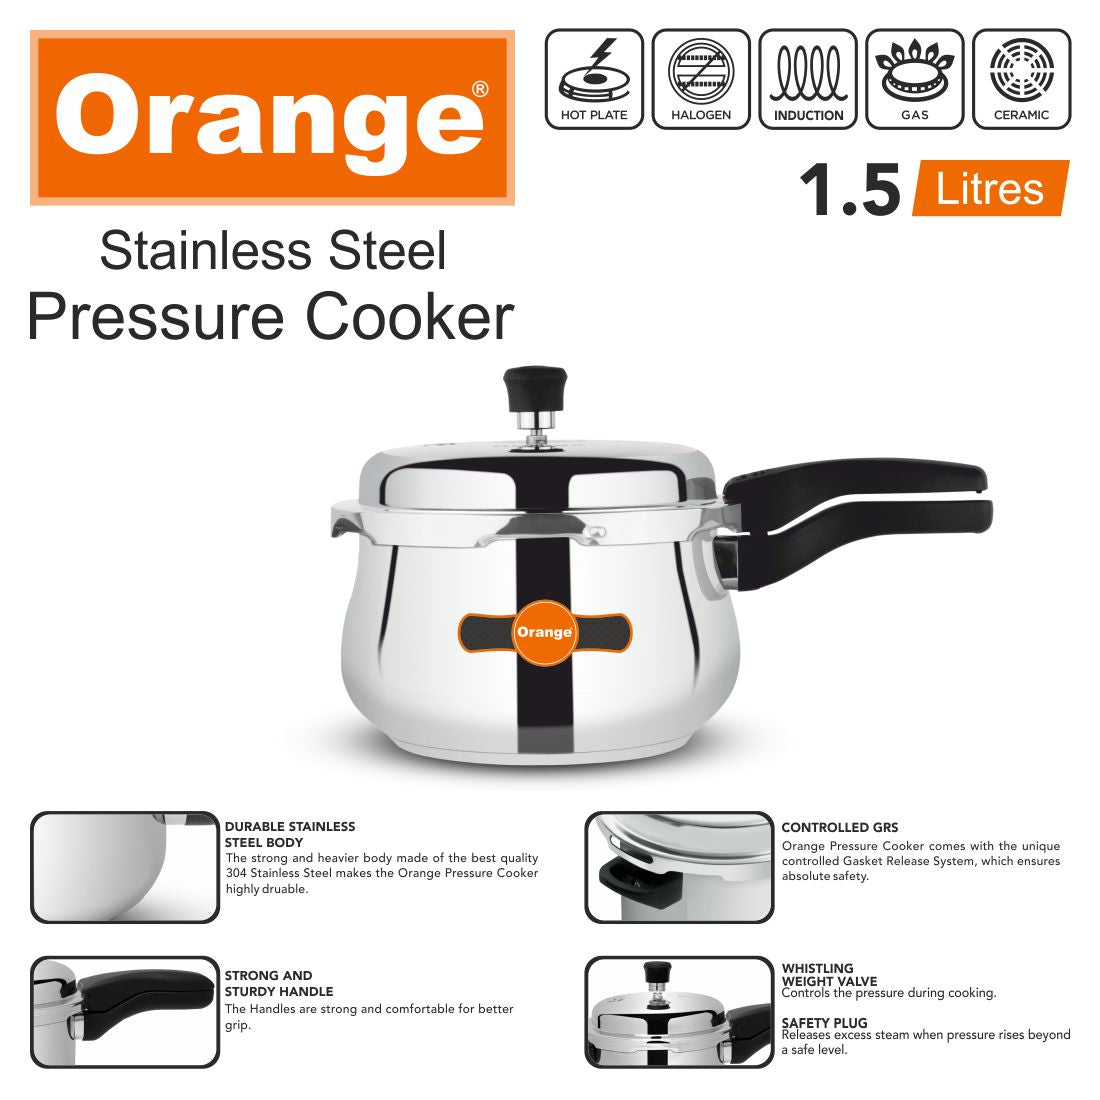 Orange Triply Stainless Steel Outer Lid Pressure Cooker Handi With Toughened Glass Lid